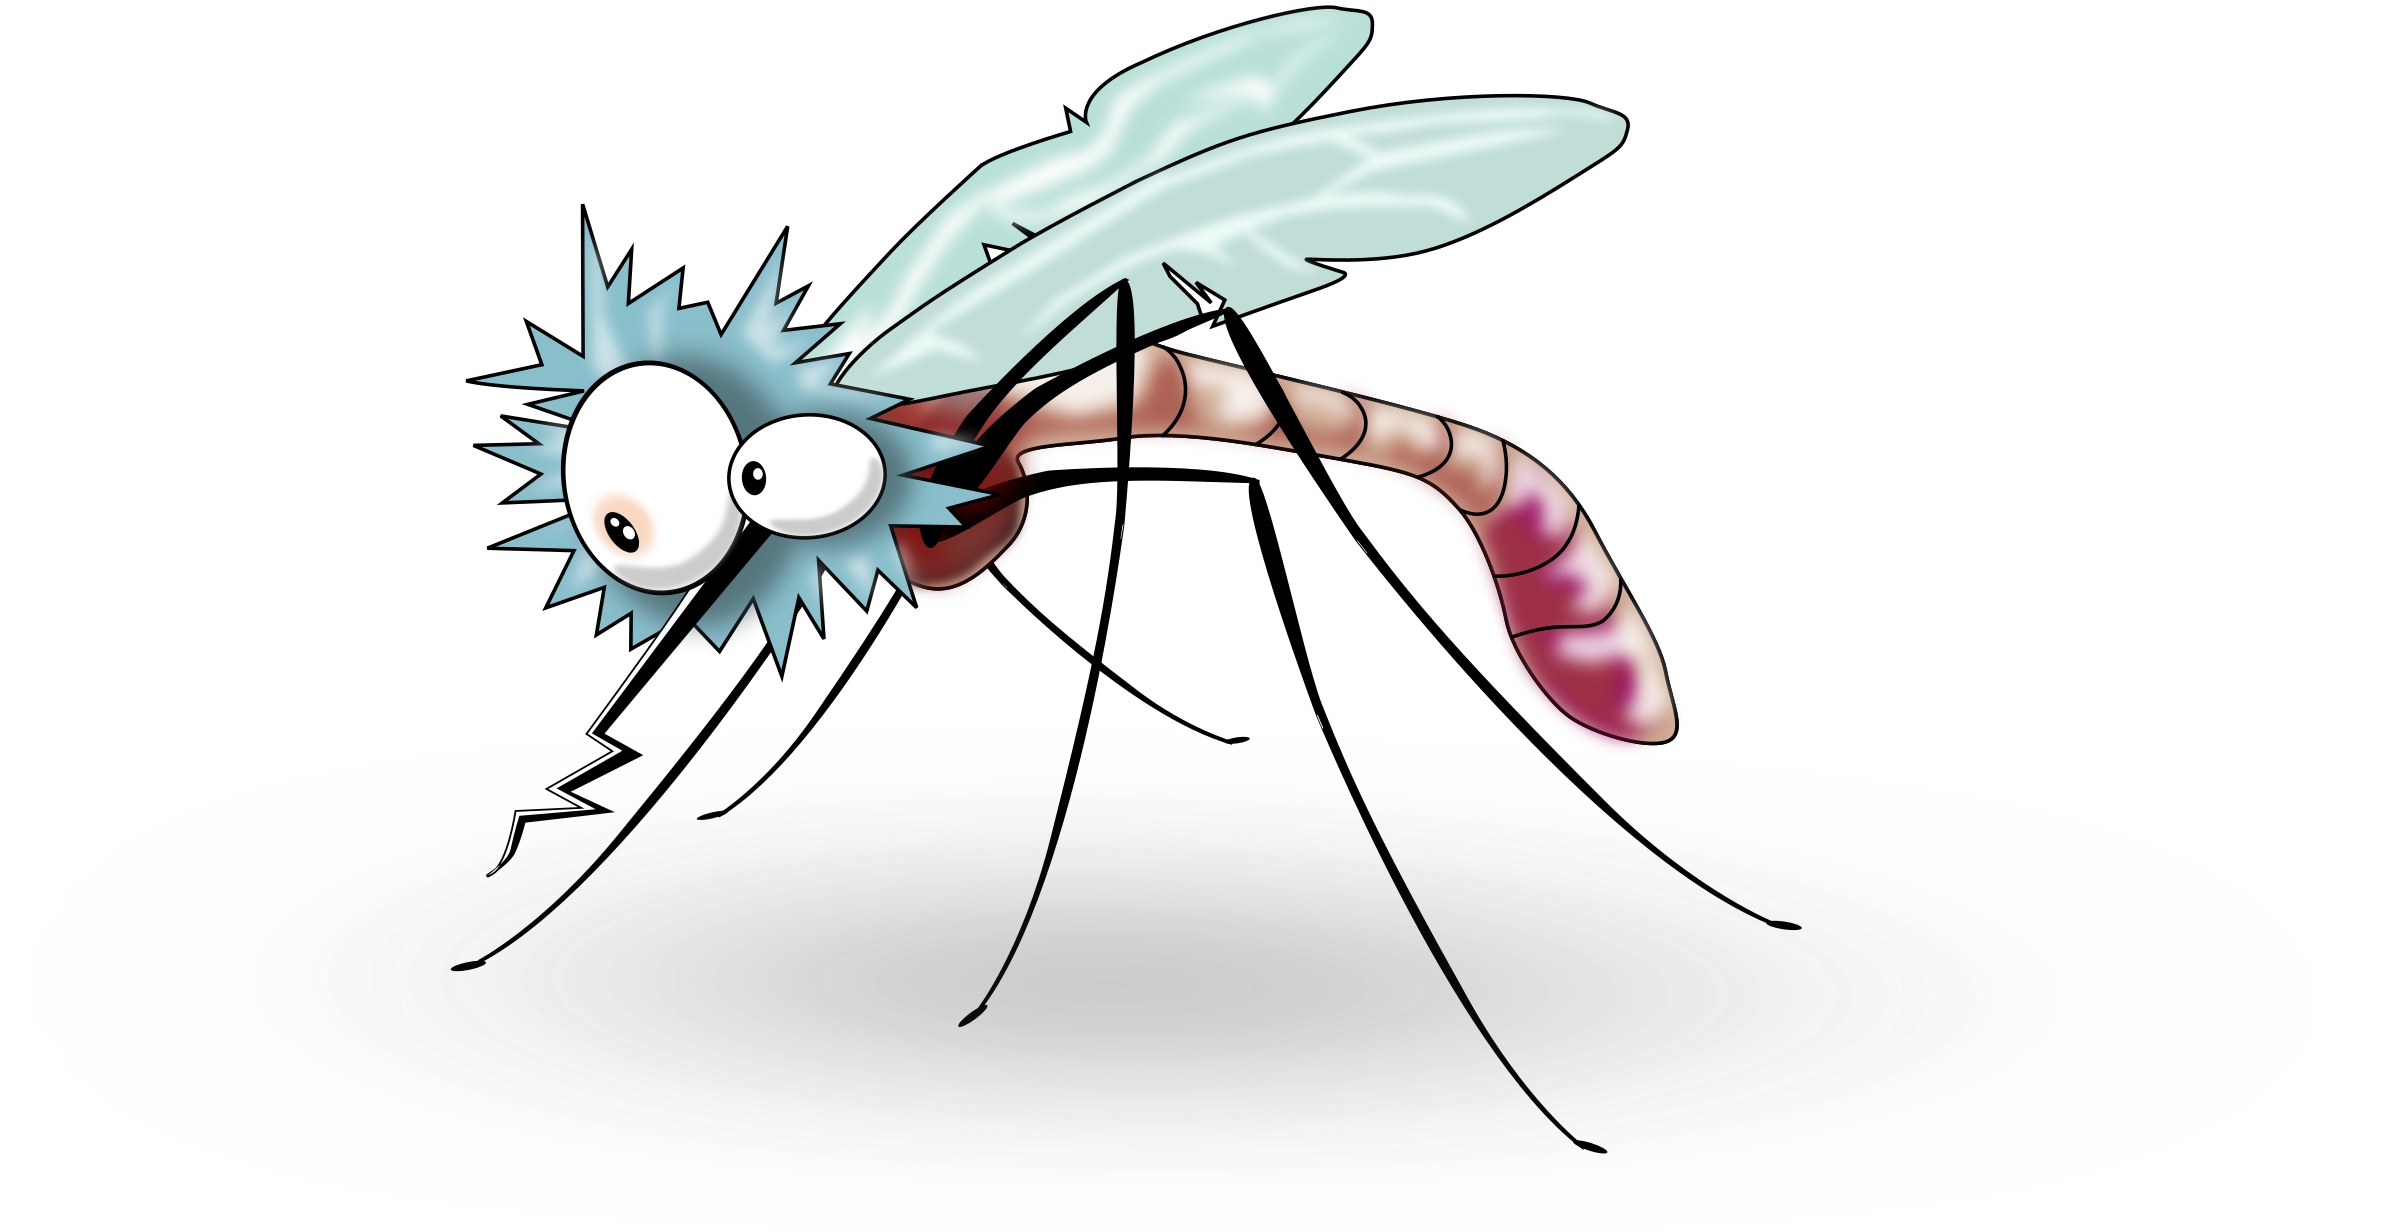 Mosquito clipart svg. Funny from side icons